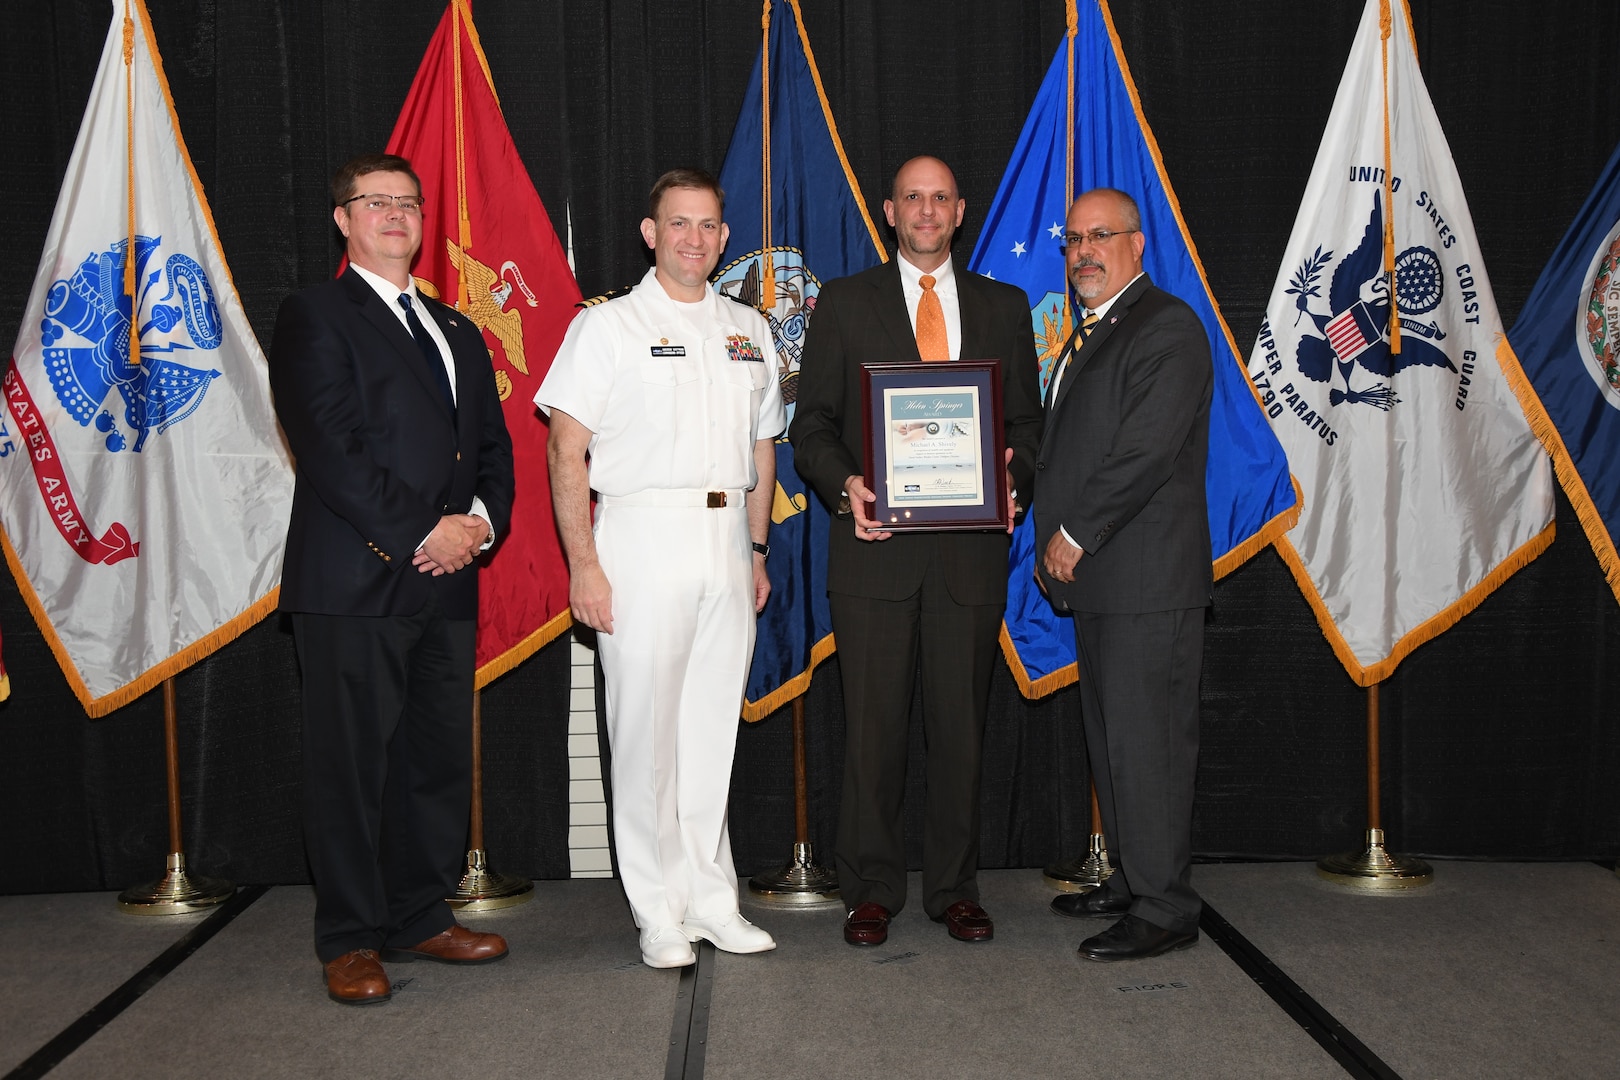 IMAGE: Michael Shively is presented the Helen Springer Award at Naval Surface Warfare Center Dahlgren Division's annual awards ceremony, Apr. 26 at the Fredericksburg Expo and Conference Center.

The award recognizes individuals who have made a notable and significant impact to business operations at NSWCDD. The award was named in honor of Helen Springer, a former NSWCDD Deputy Human Resources Director who was instrumental in transforming business operations at Dahlgren from a paper-based system to an electronic environment.